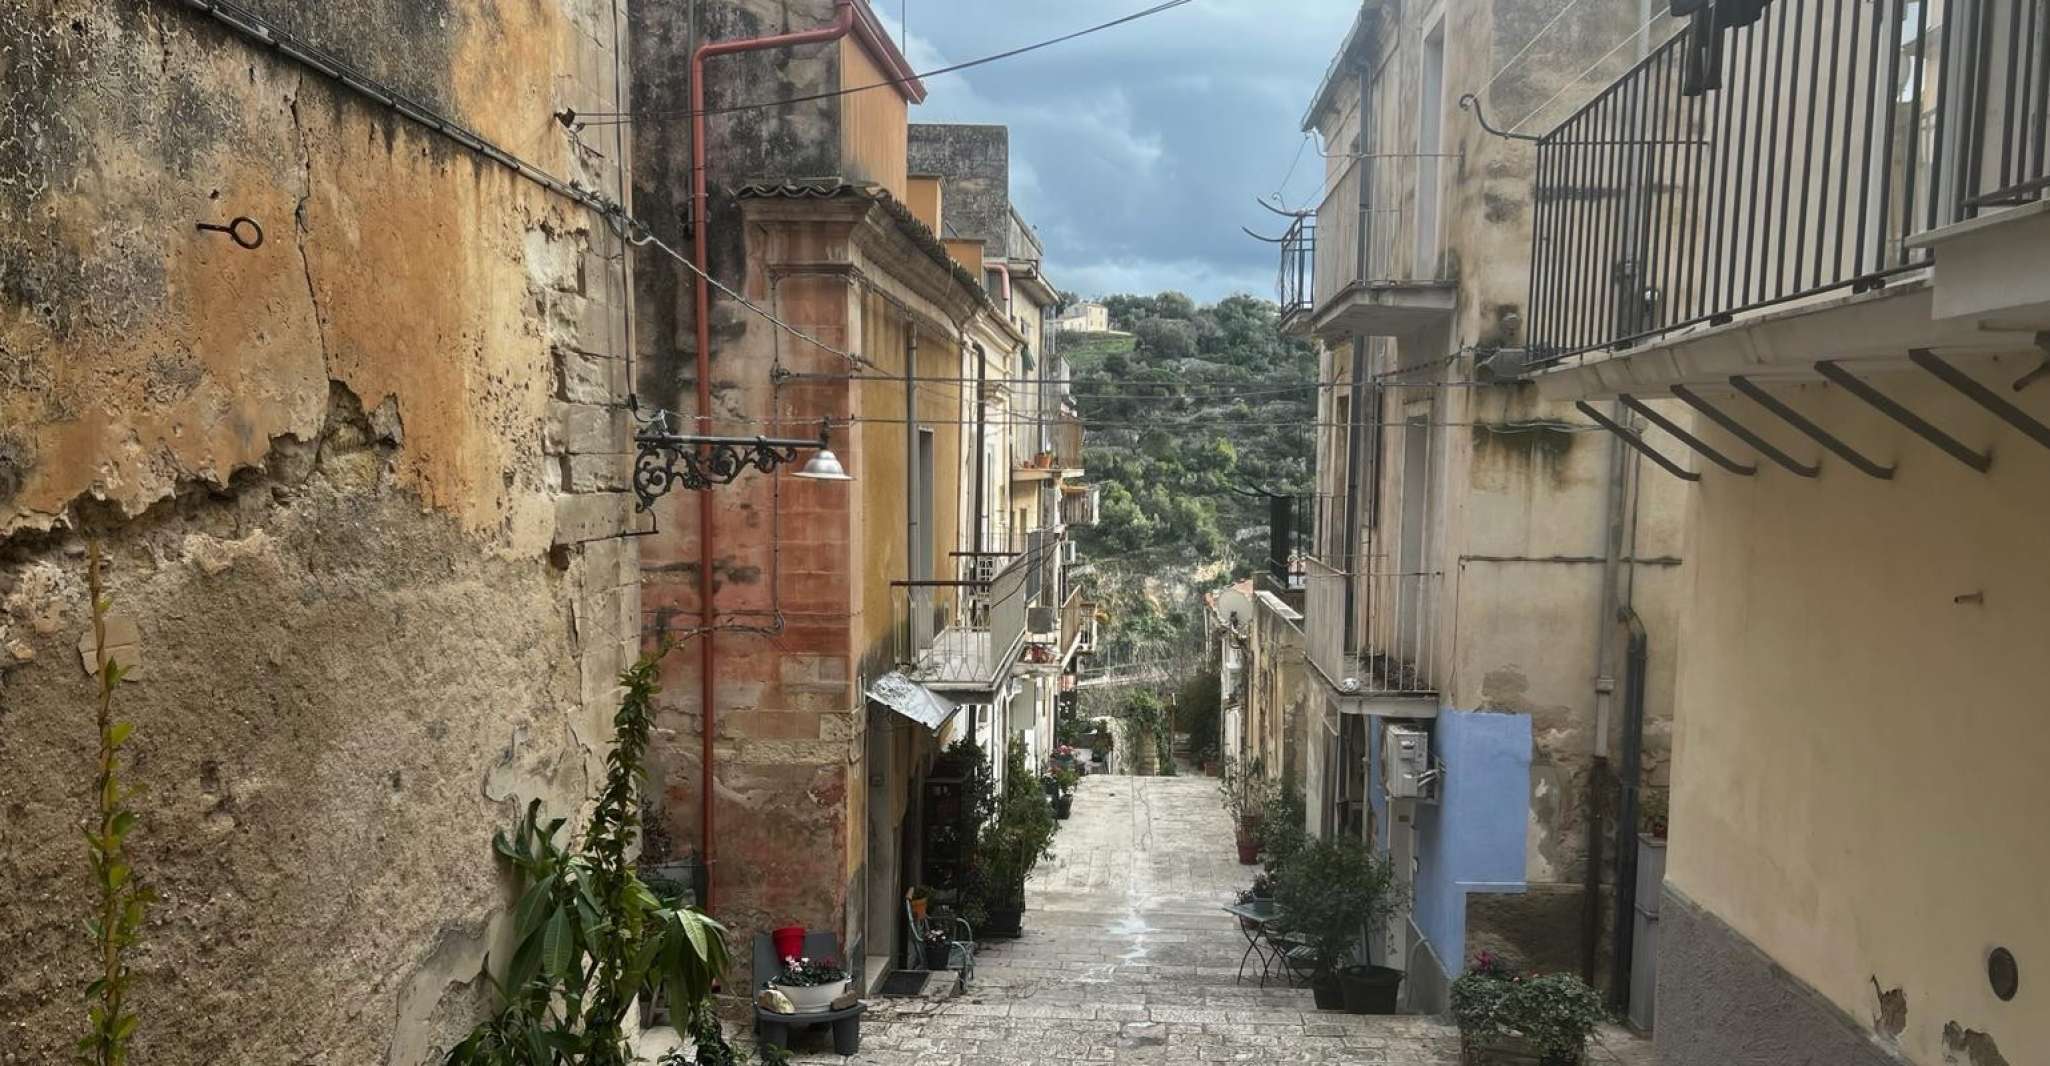 Ragusa Ibla, Guided Tour with Food Tasting - Housity